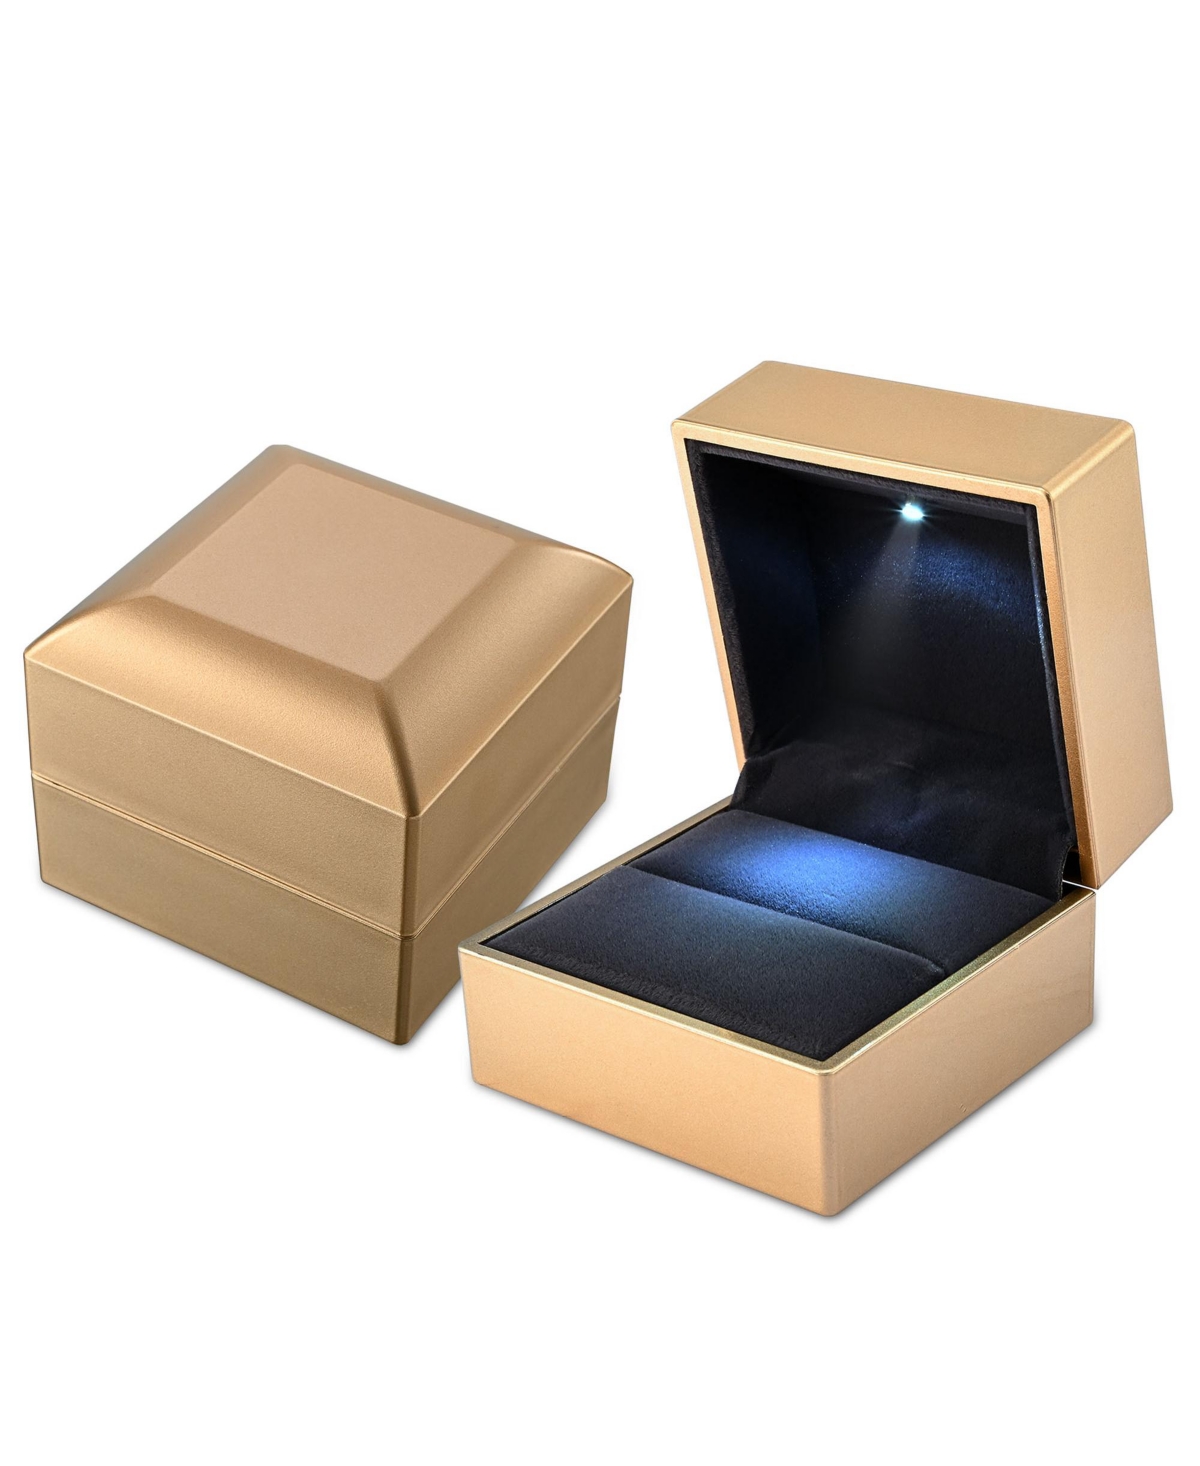 Led Ring Box Jewelry Wedding Engagement Proposal Lighted Pin Coin Case 2 Pack - Gold